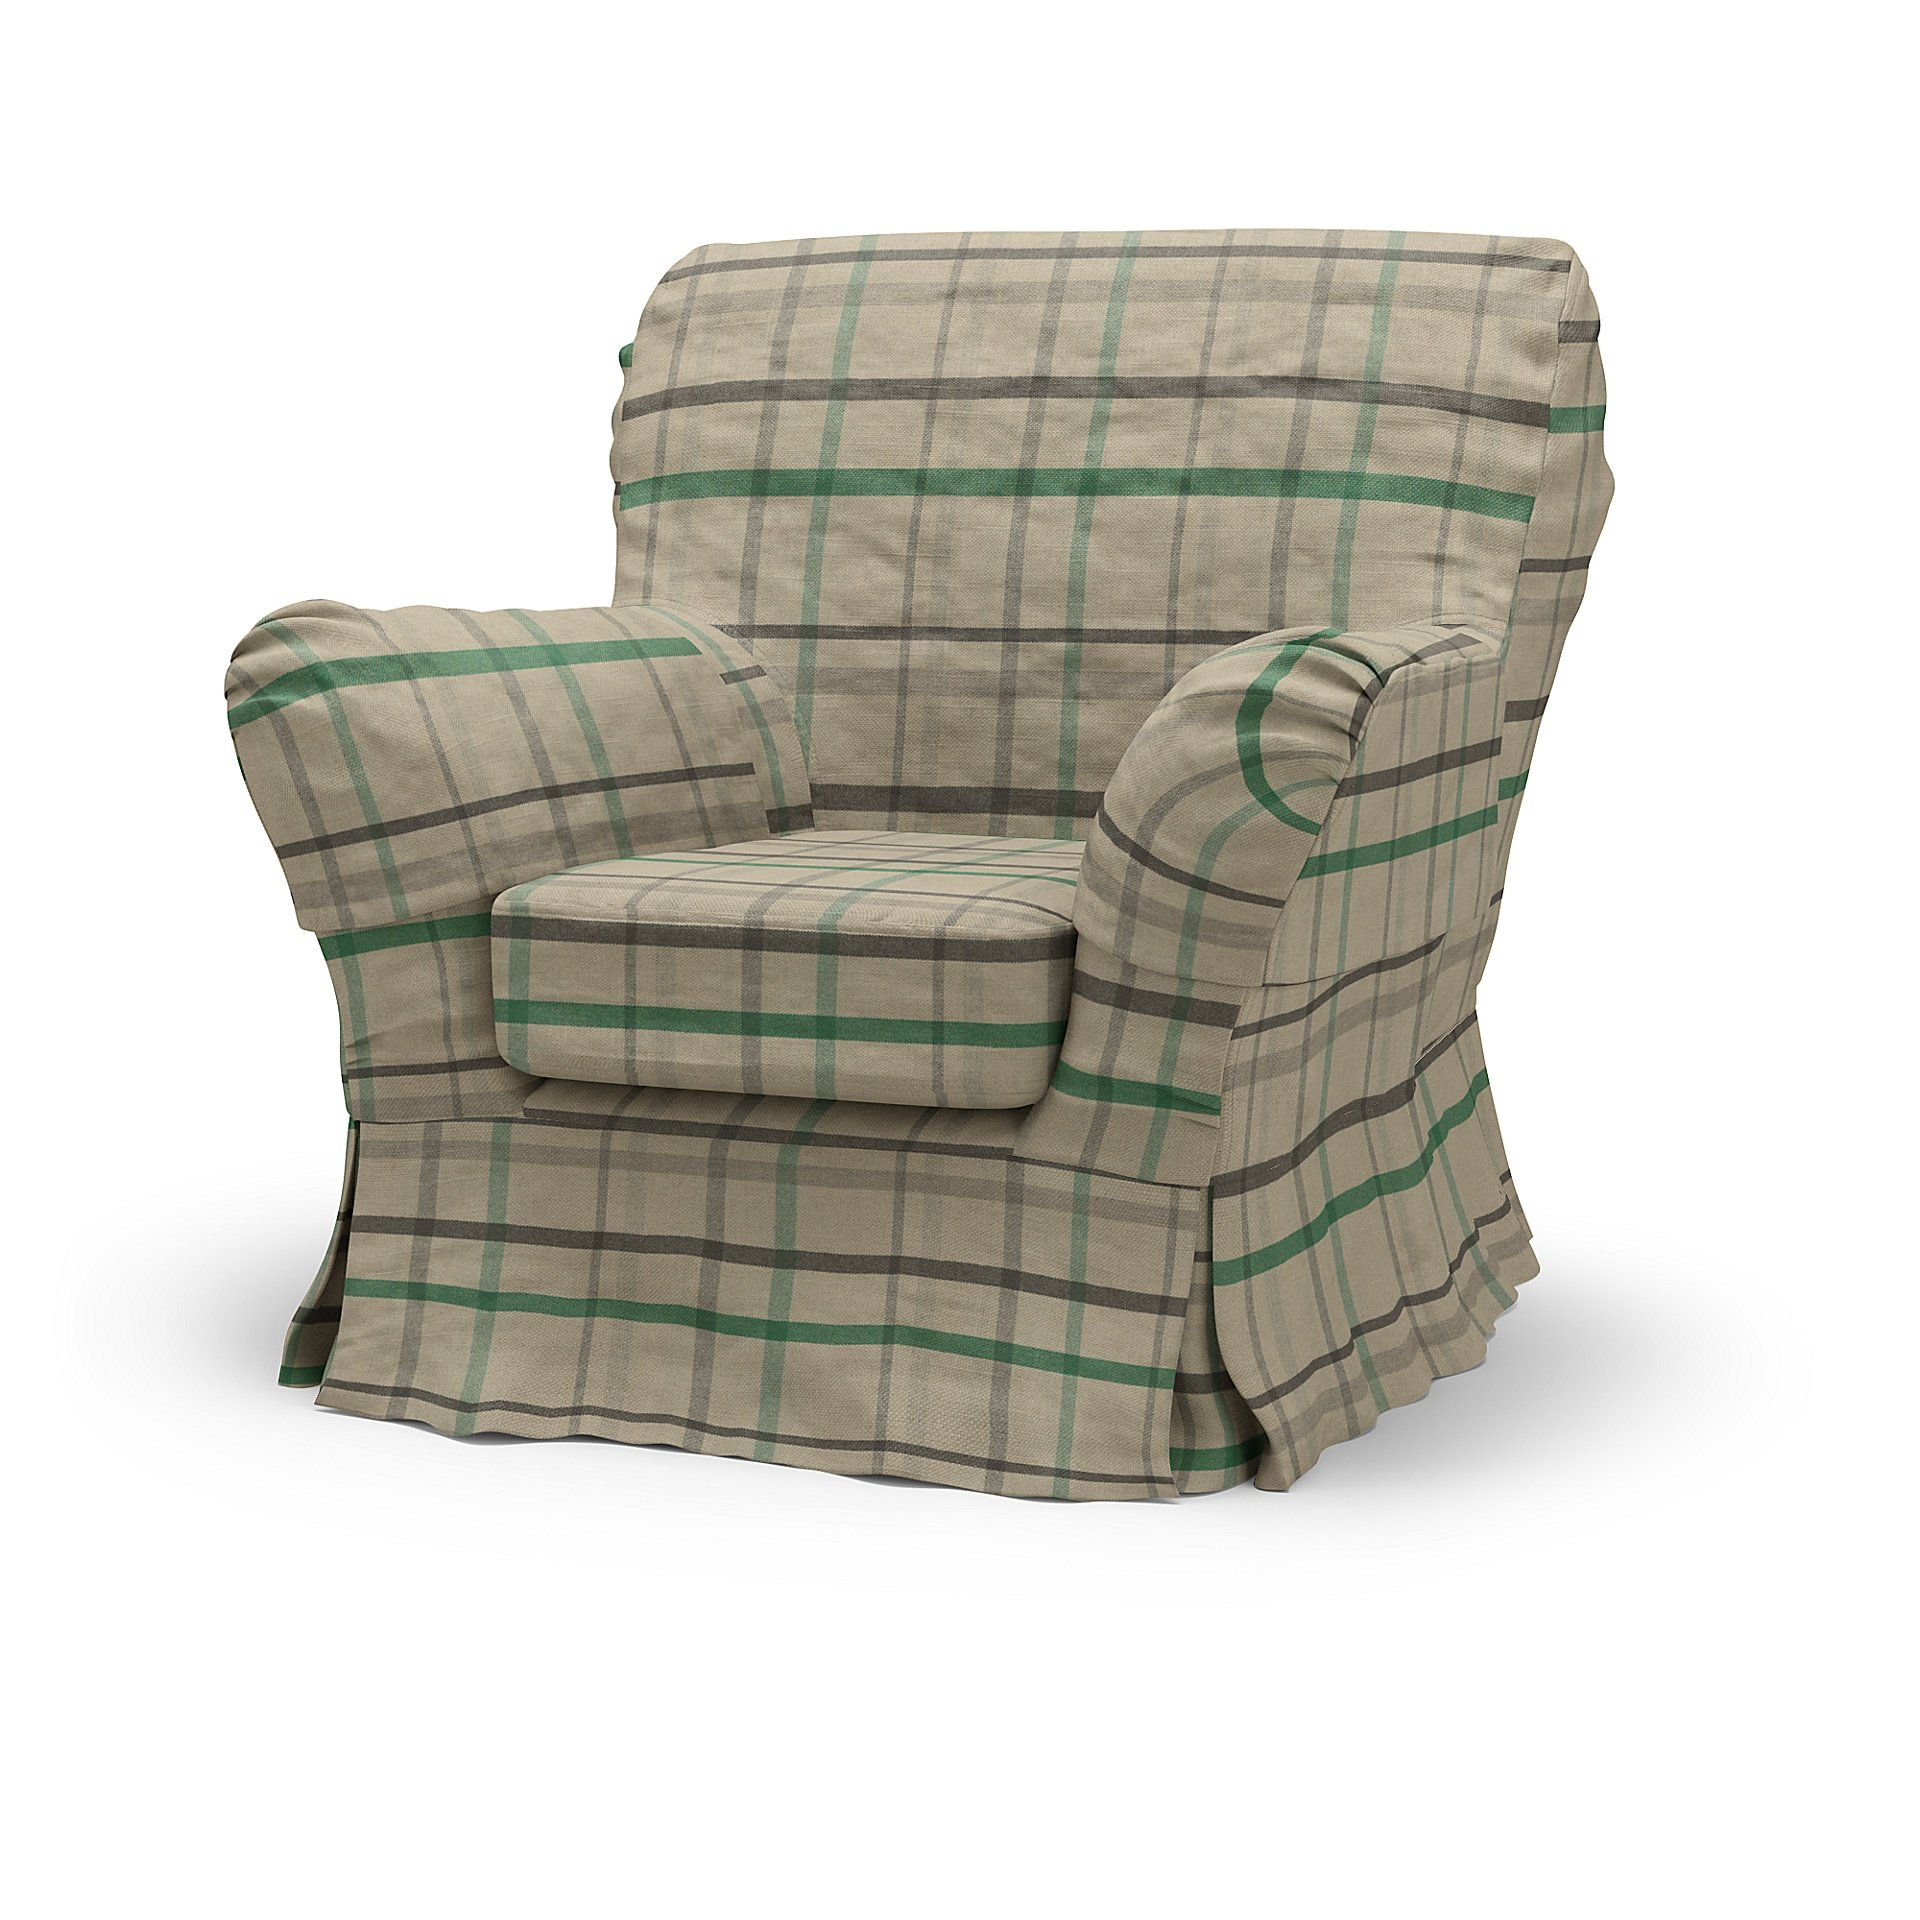 IKEA - Tomelilla High Back Armchair Cover, Forest Glade, Wool - Bemz